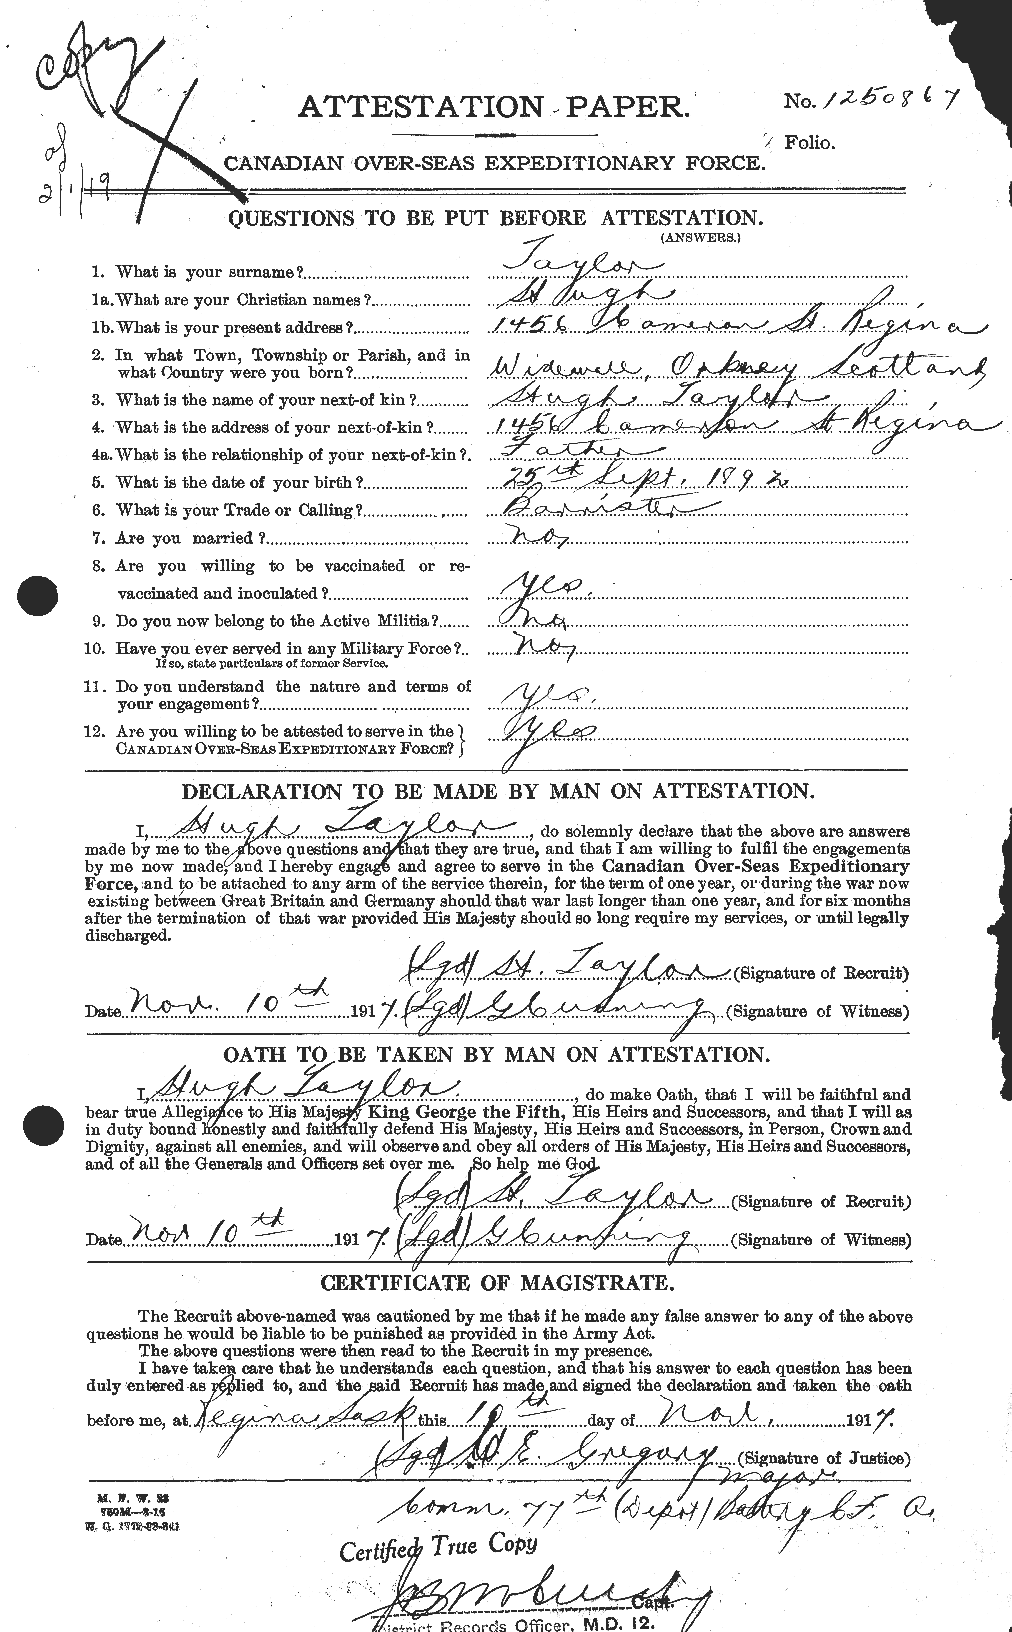 Personnel Records of the First World War - CEF 626612a